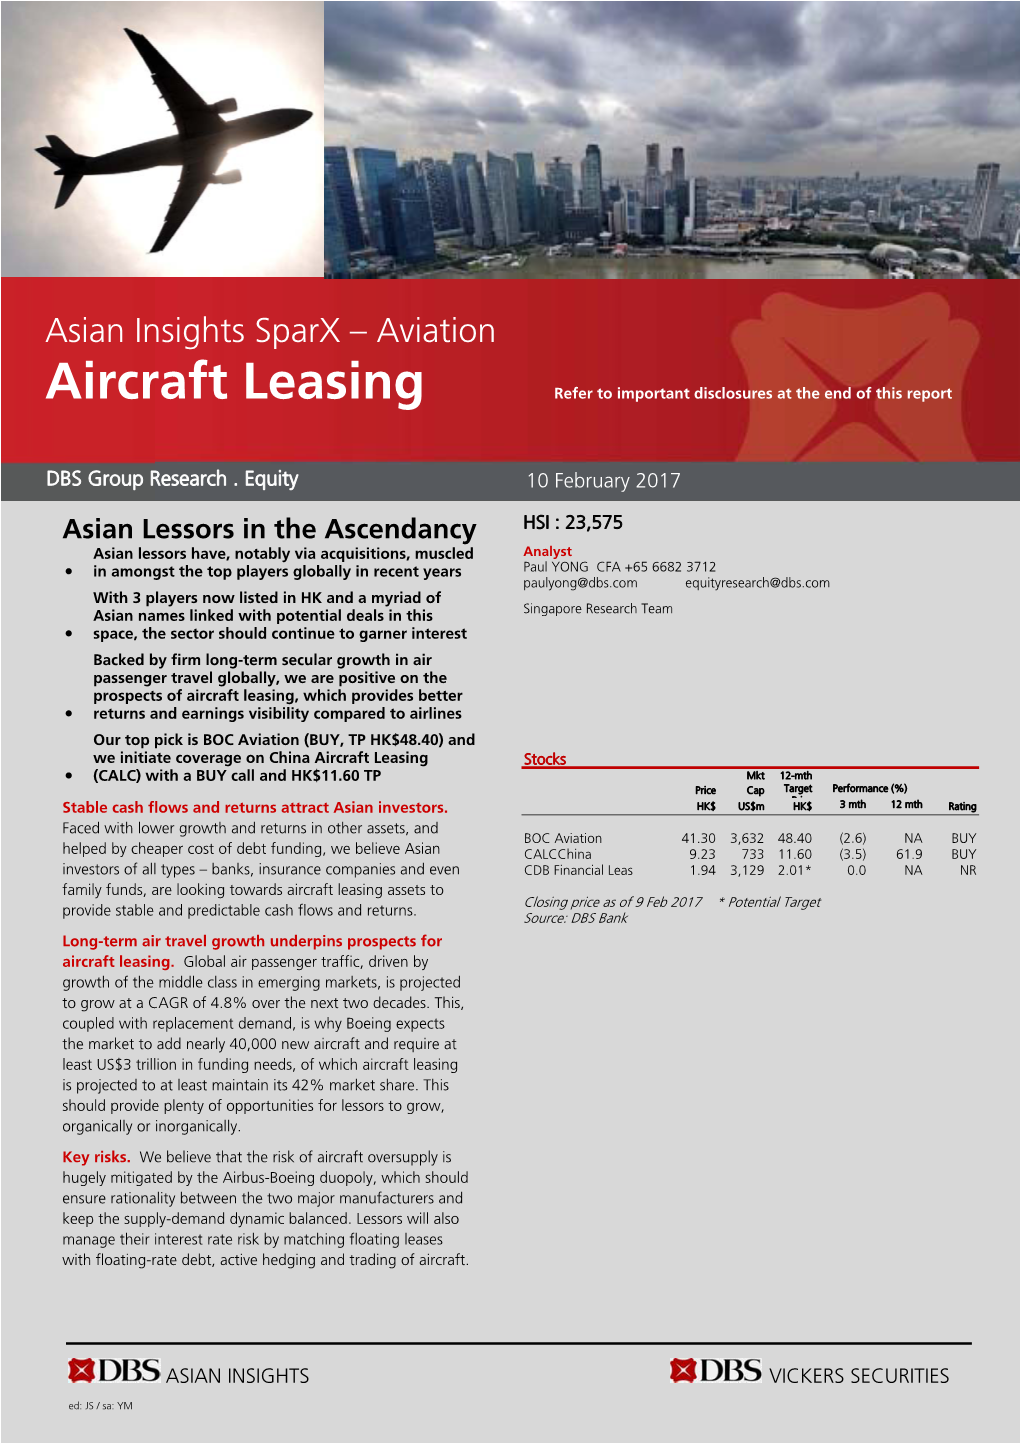 Aircraft Leasing Refer to Important Disclosures at the End of This Report